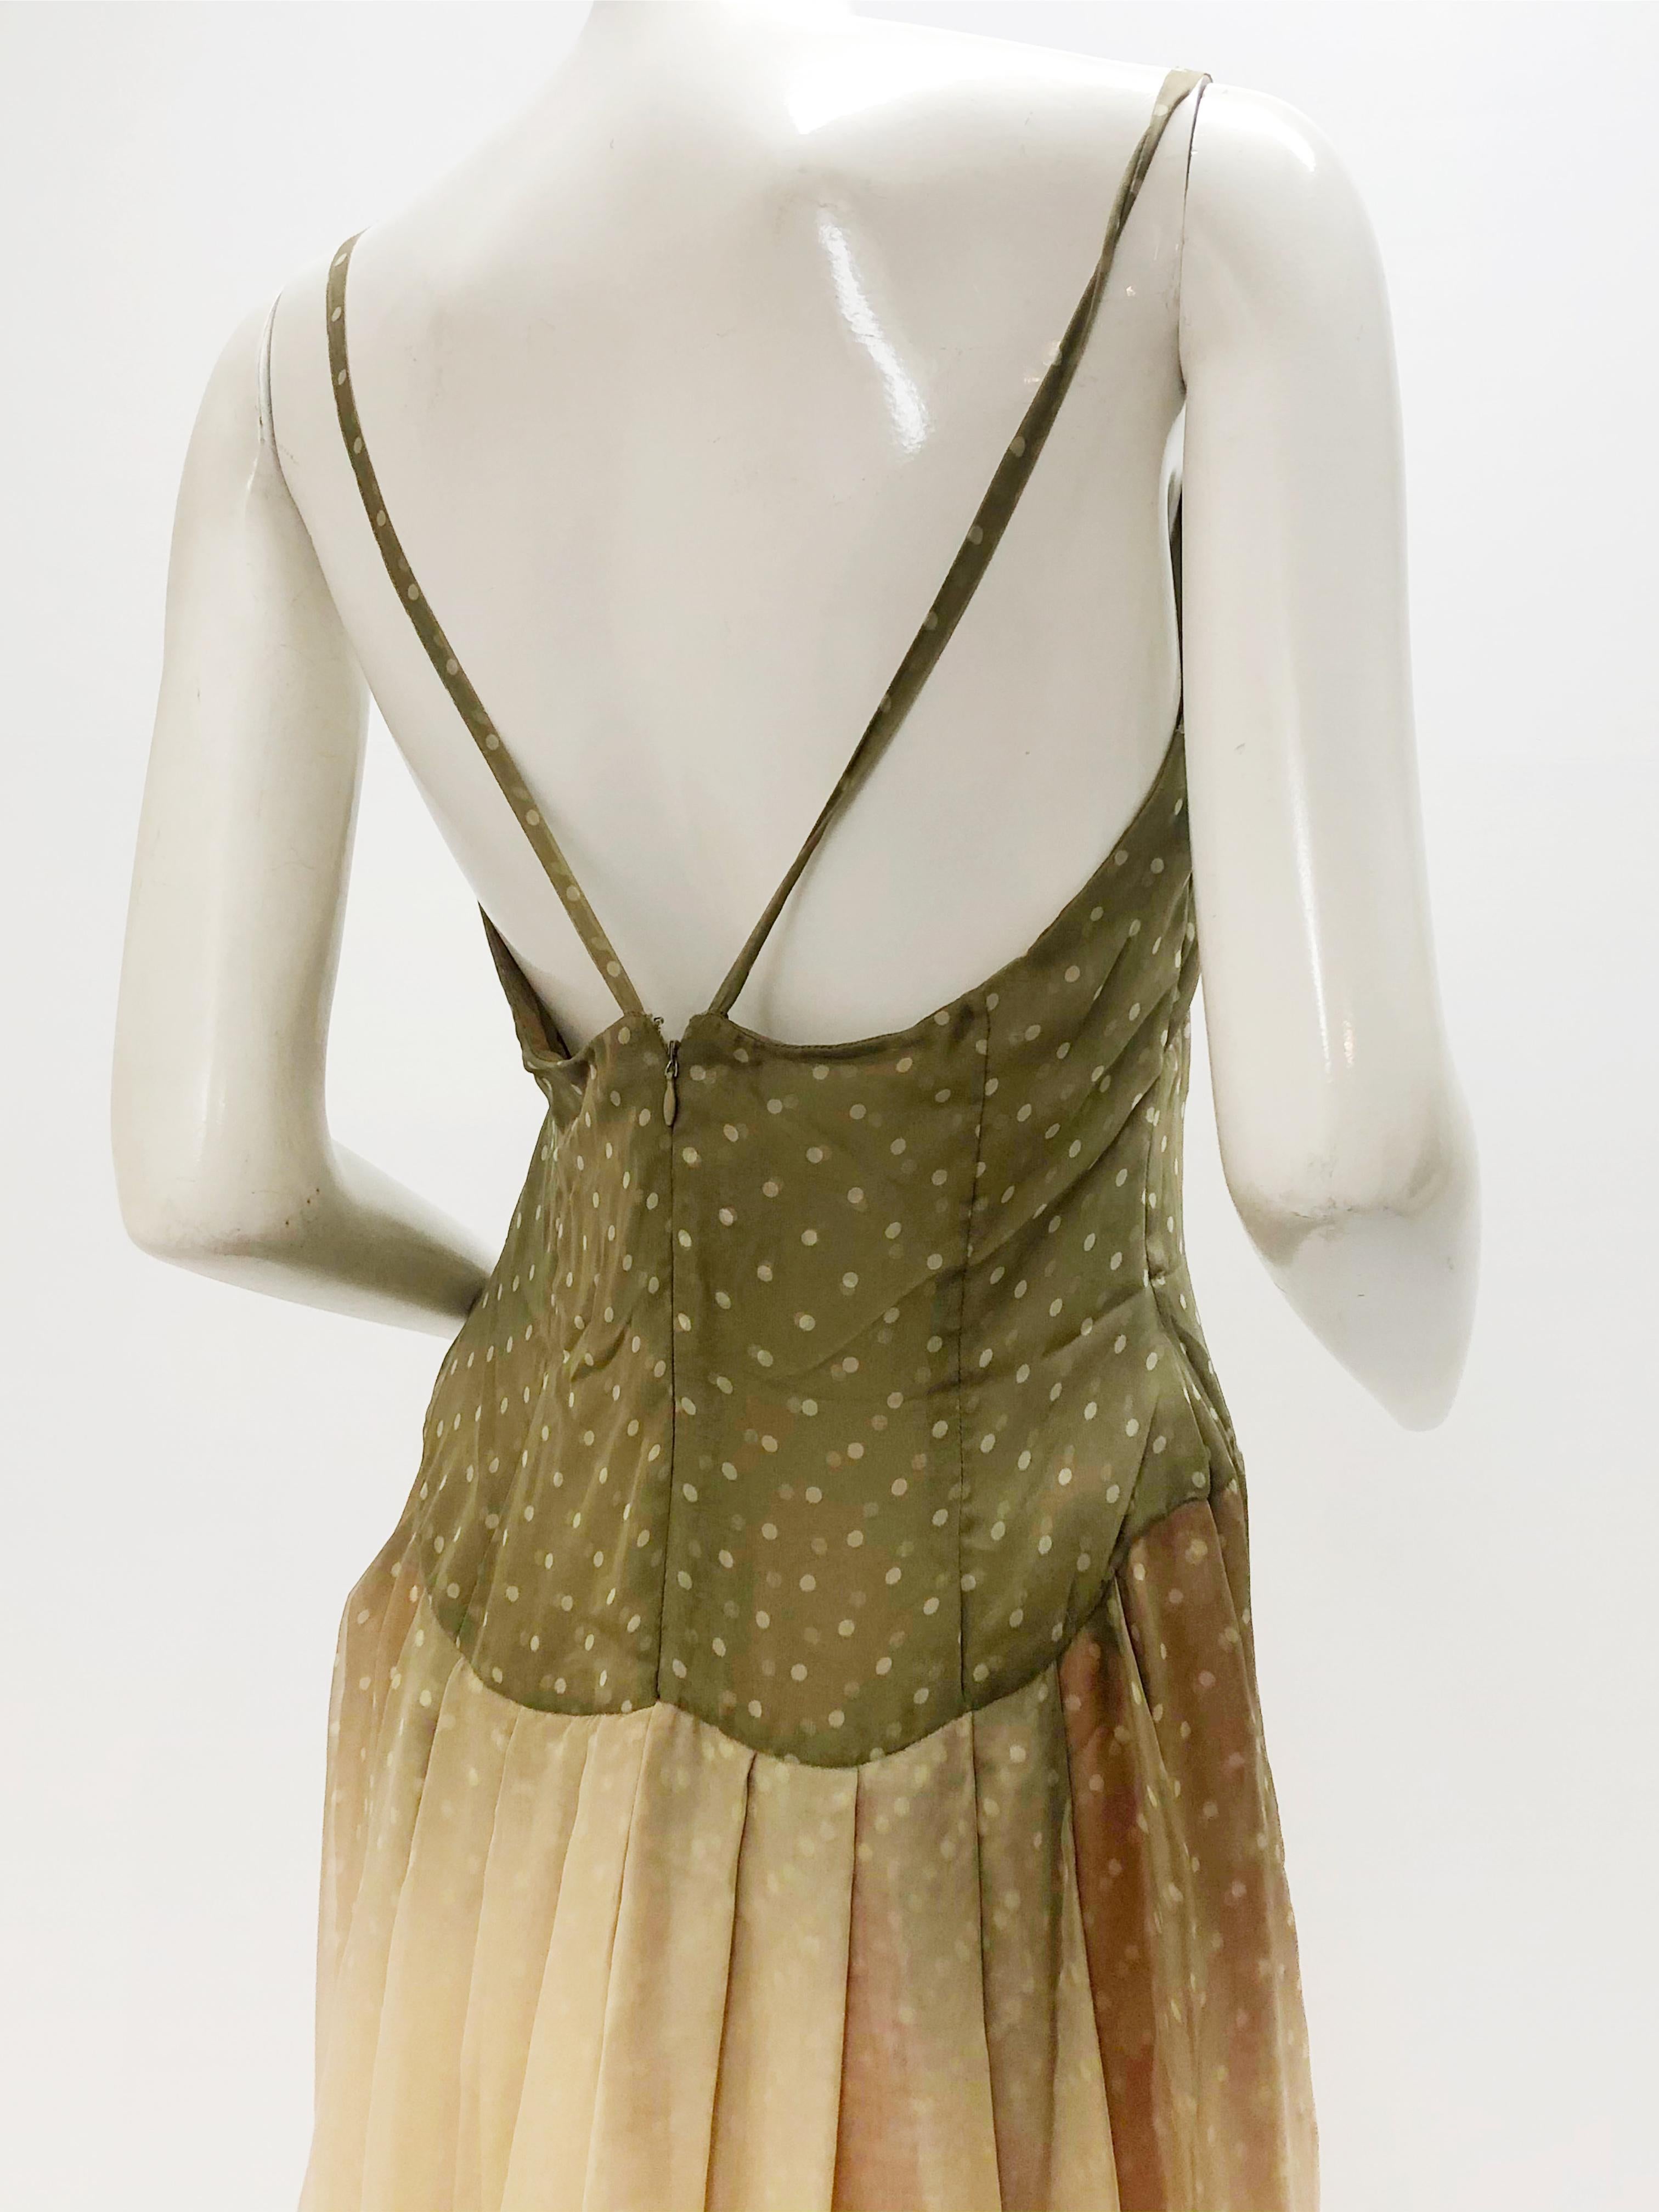 Women's 1970 Bill Blass Ombré Polka Dot Silk Chiffon Gown in Taupe and Pink